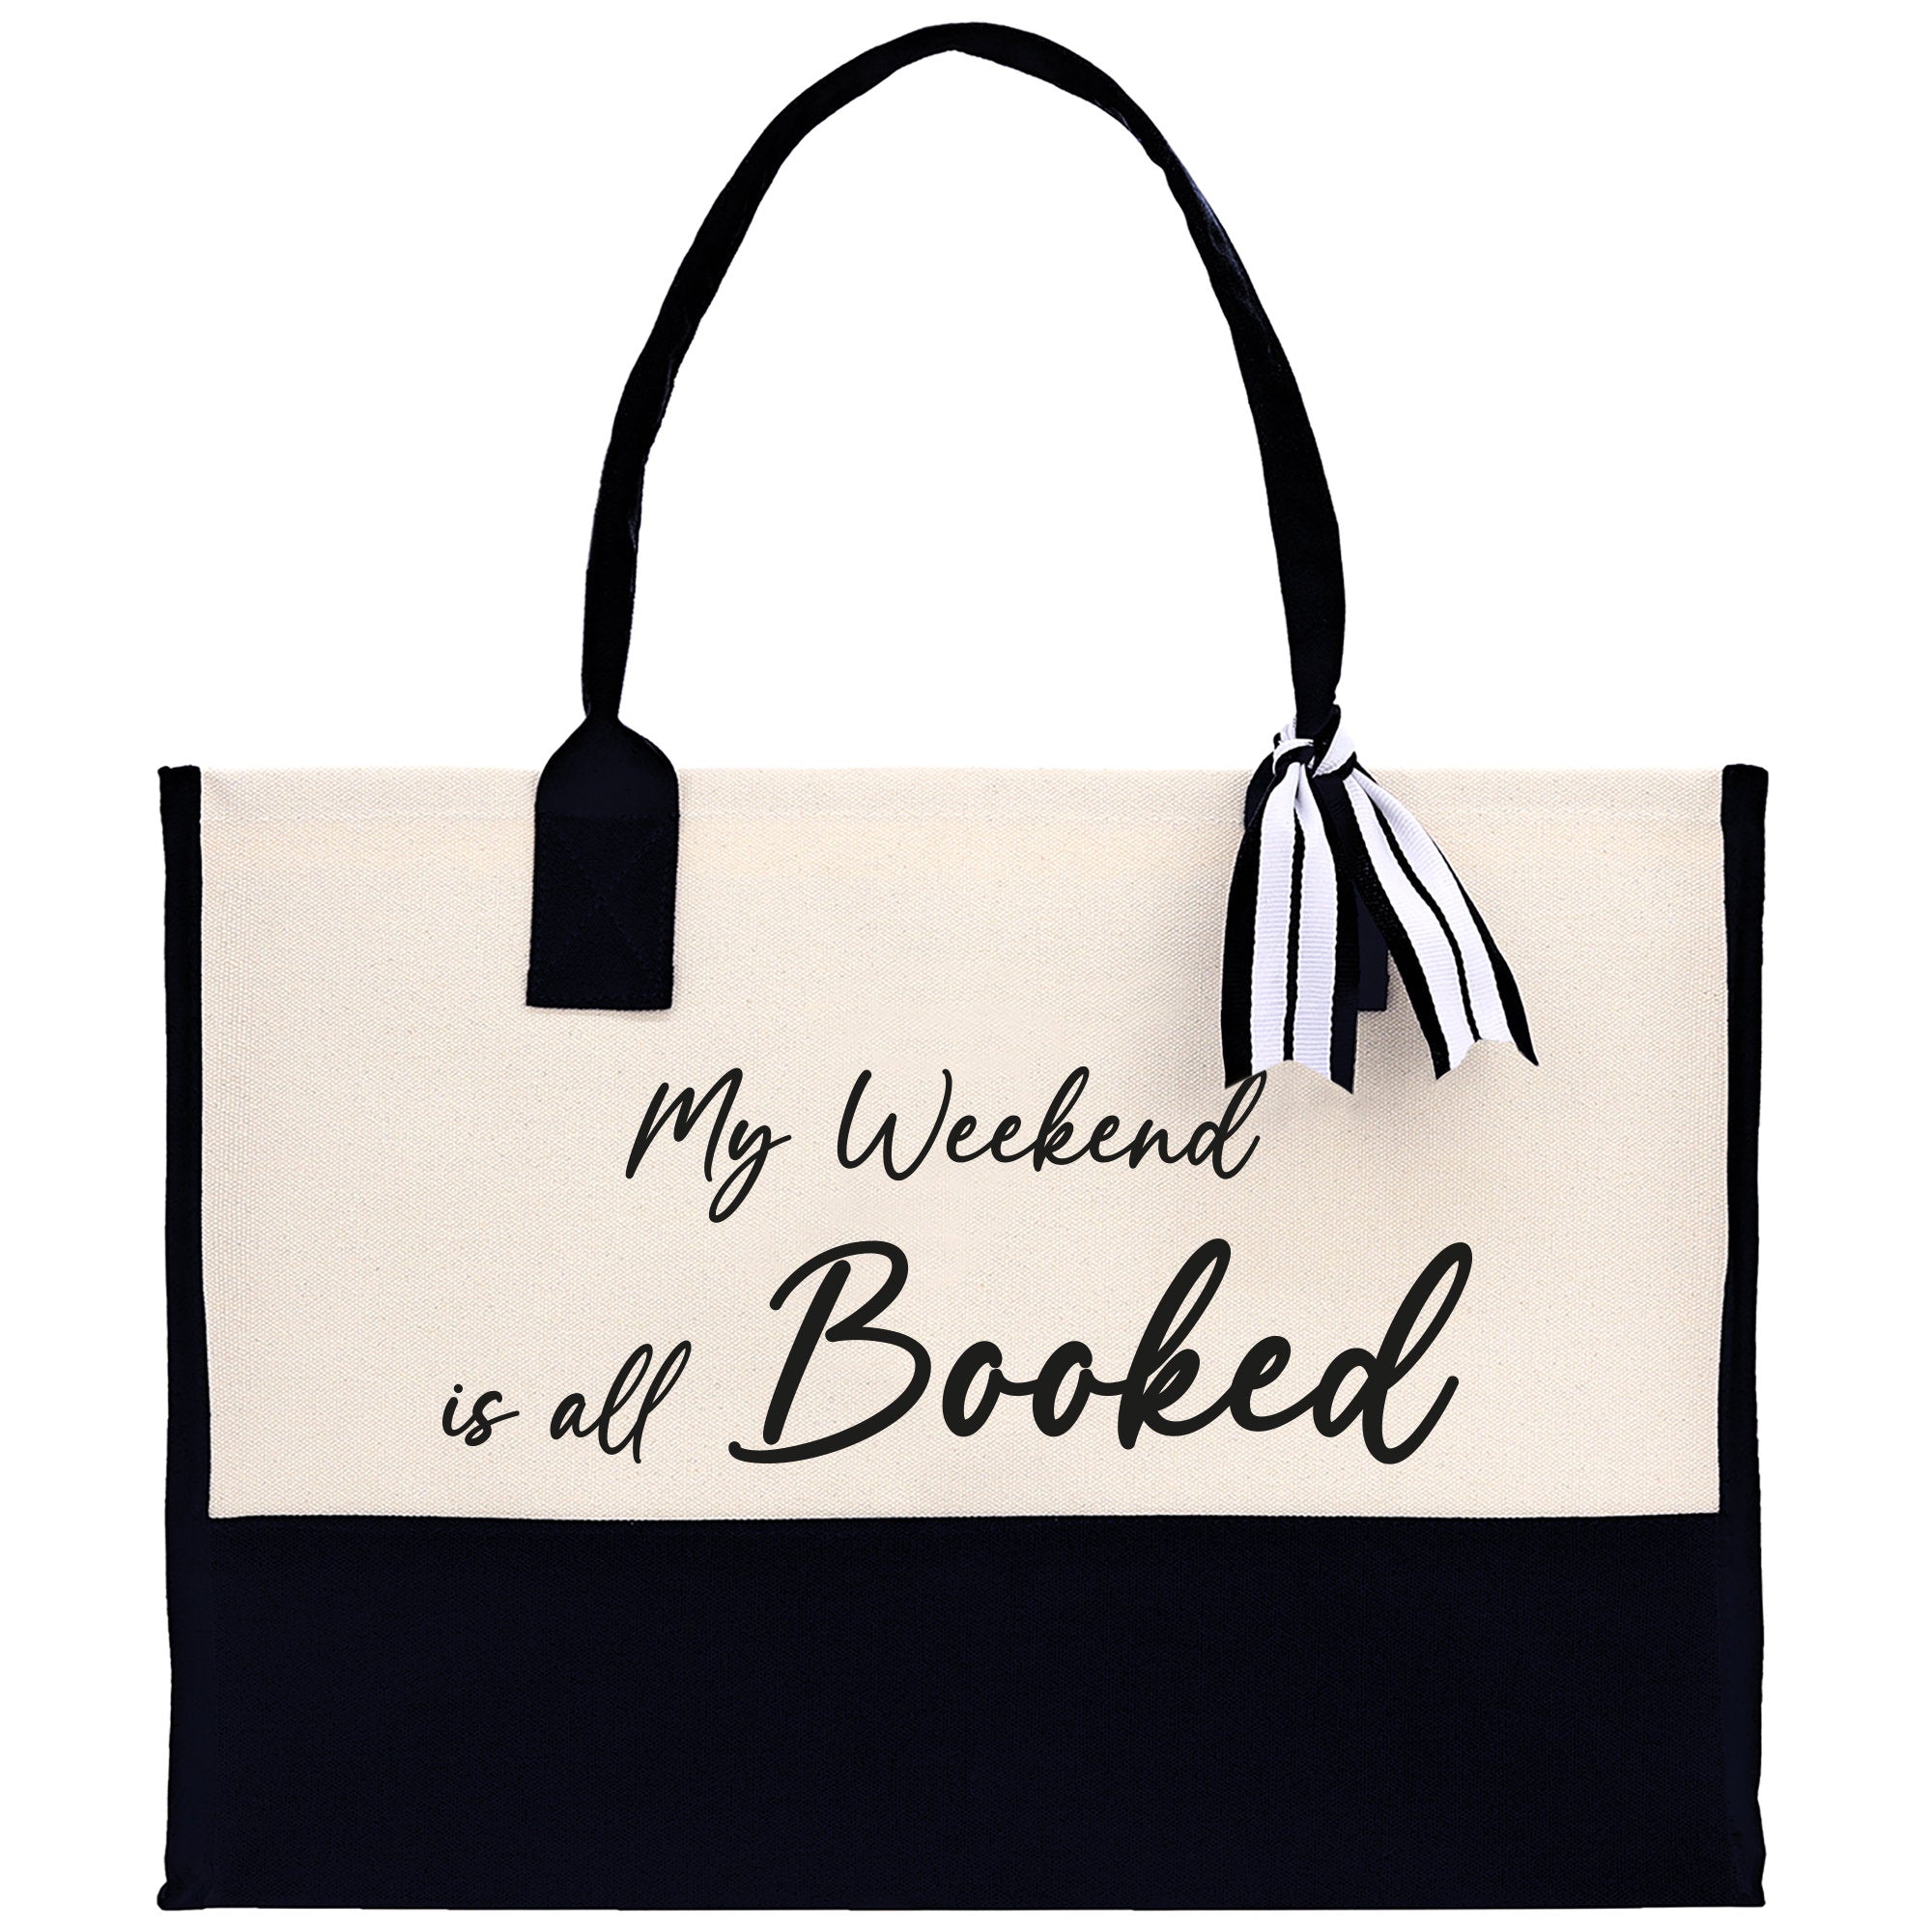 My Weekend Is All Booked Canvas Tote Bag Birthday Gift for Her Weekender Tote Bag Beach Tote Bag Canvas Large Beach Tote Bag Chic Tote Bag